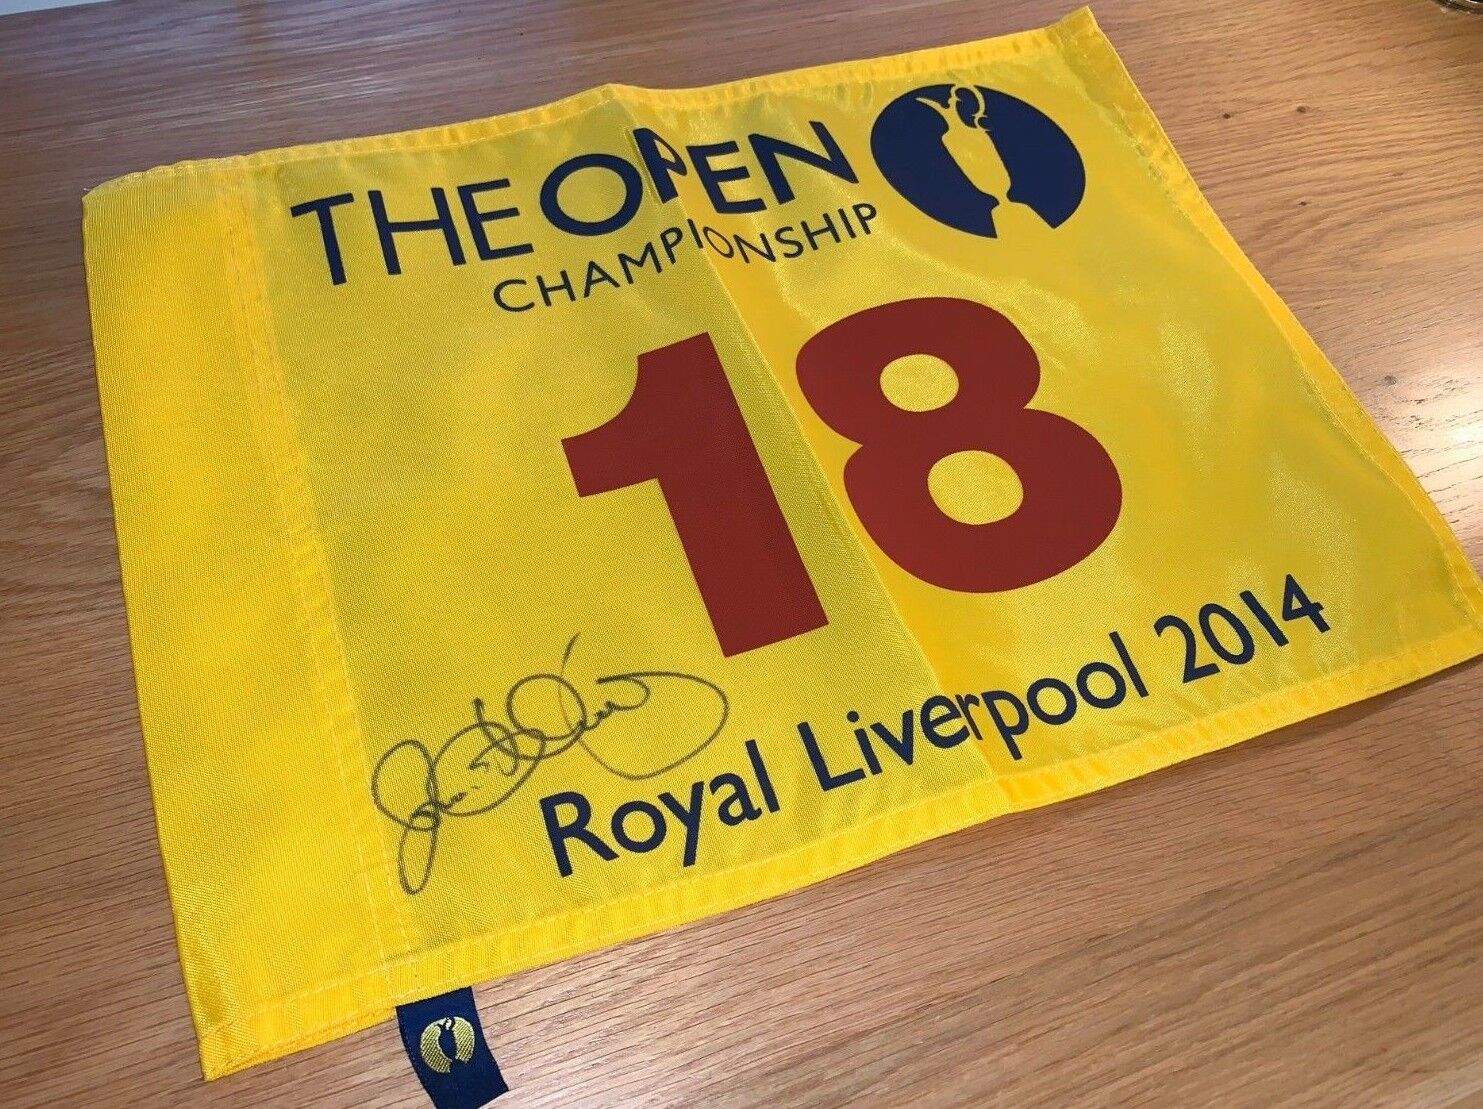 Rory McIlroy (2014 Winner) signed Royal Liverpool 2014 "The Open" Golf Flag +COA